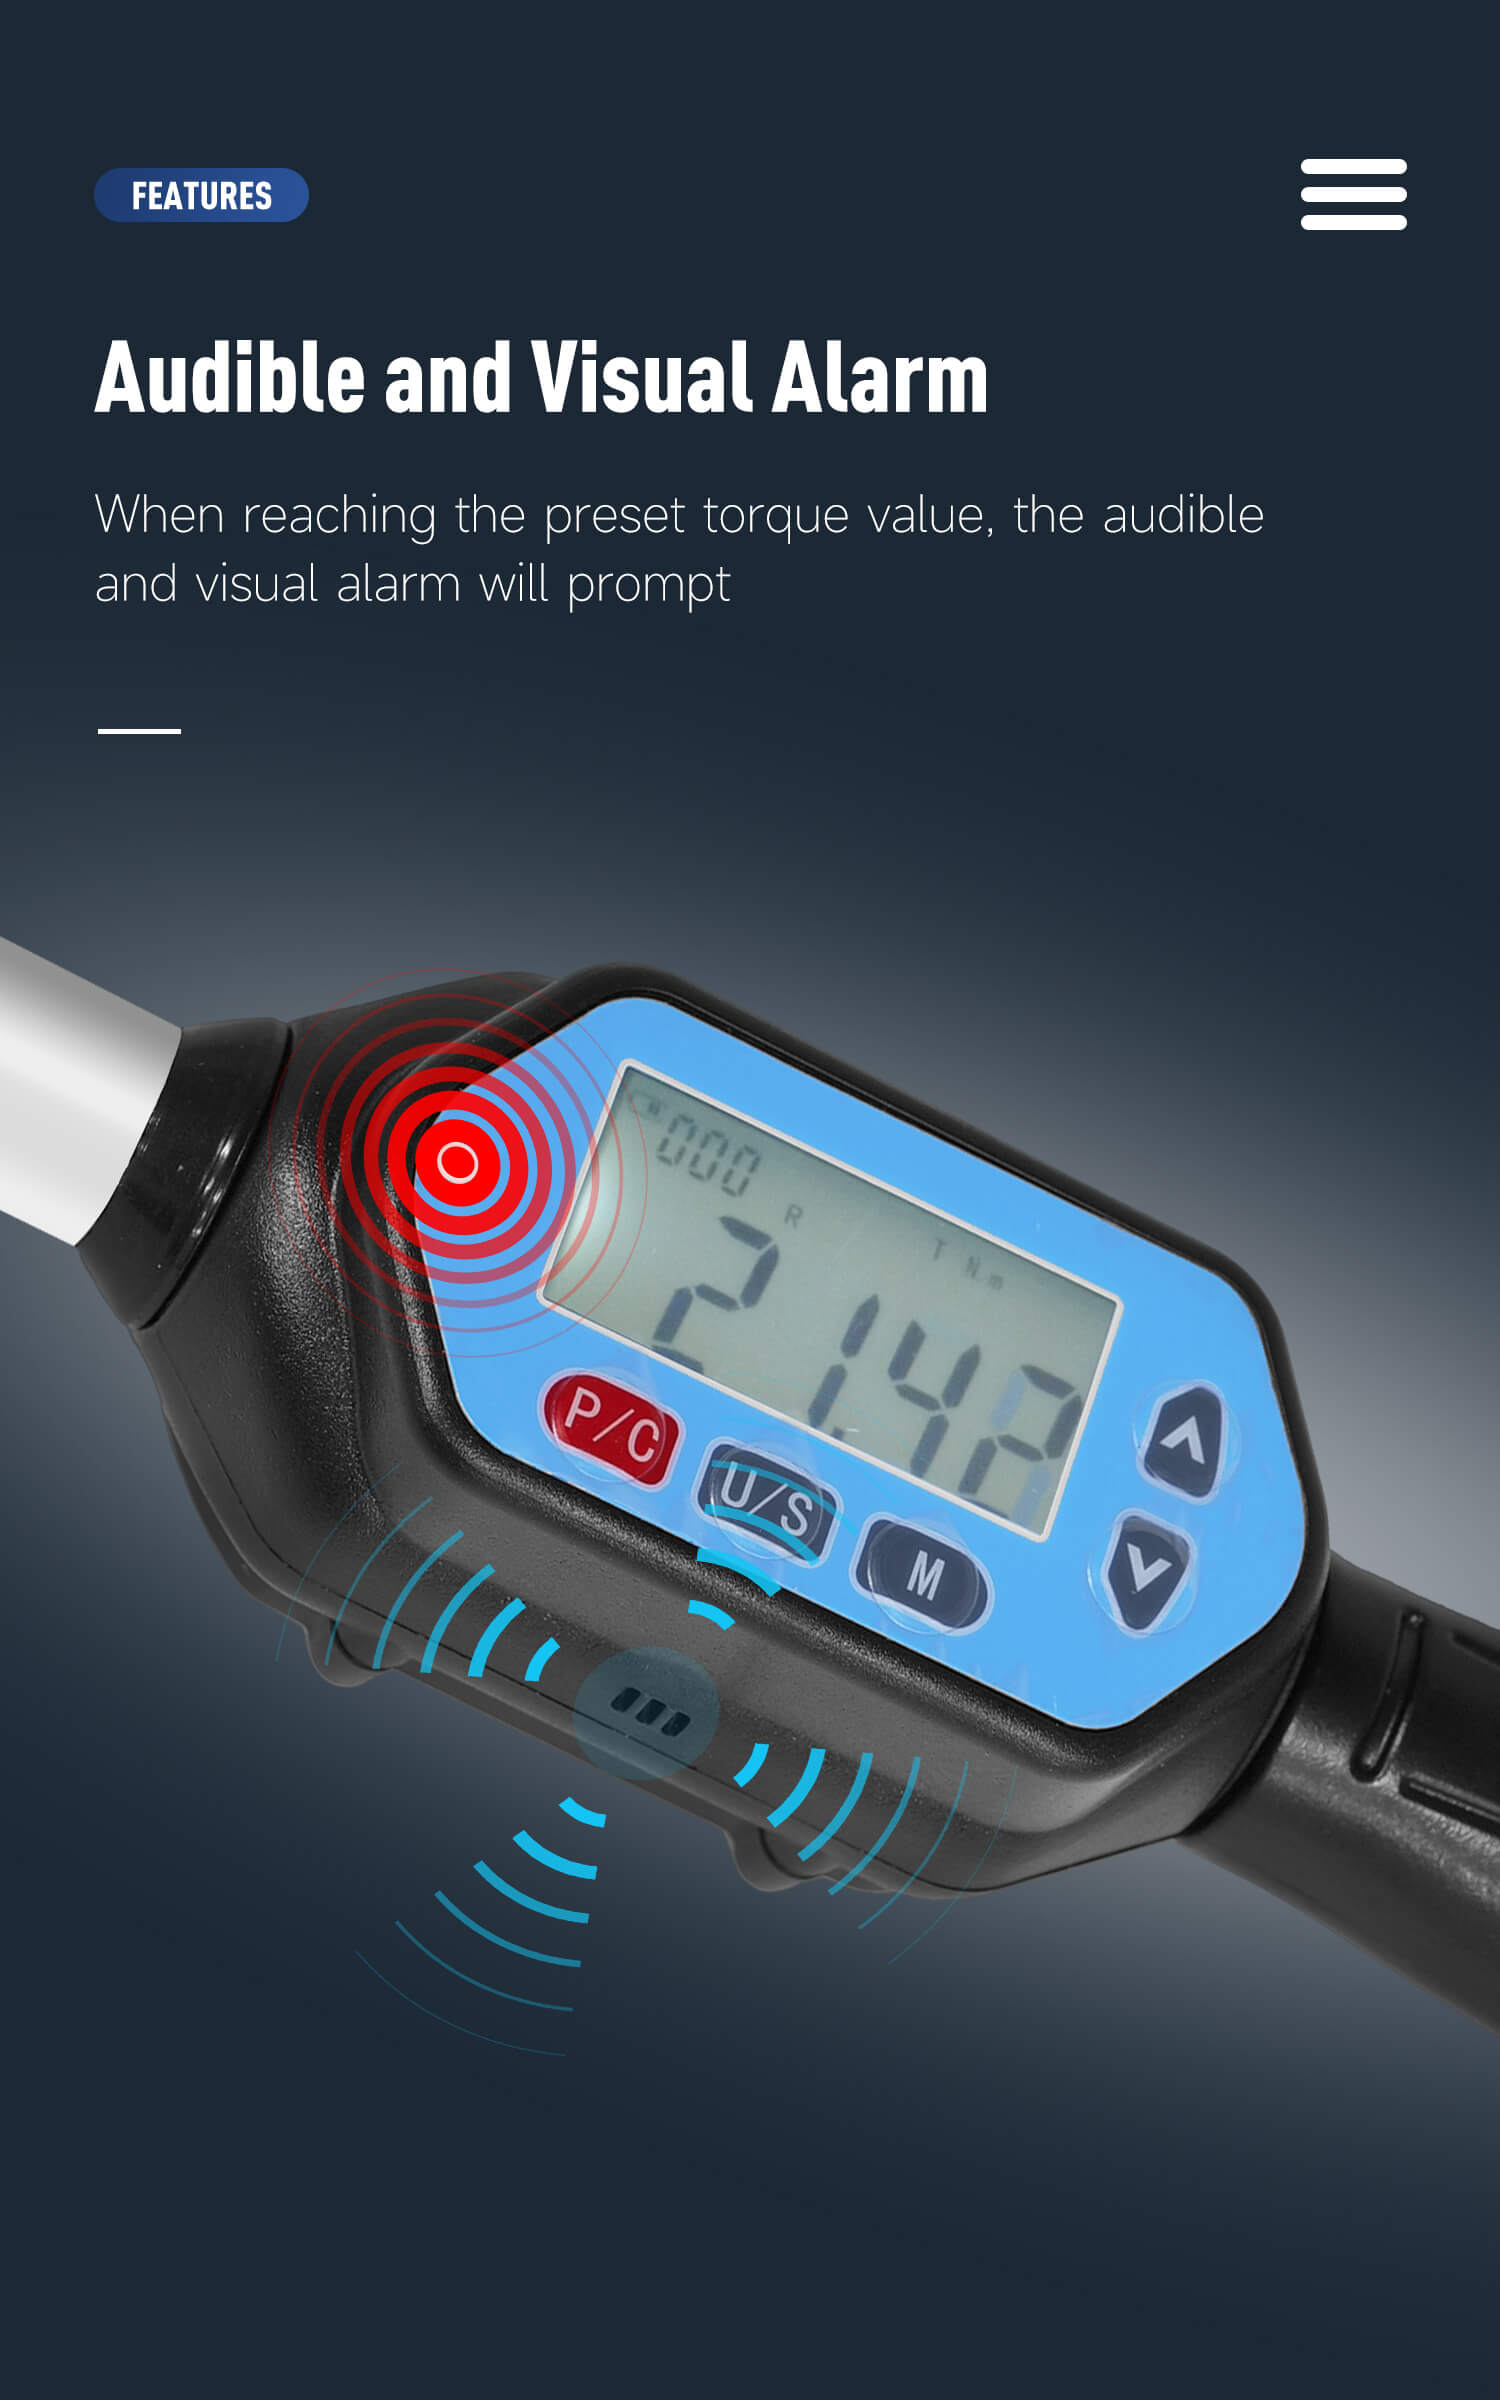 High Precision Digital Torque Wrench Made For Tightening and Removing ER20 Nuts